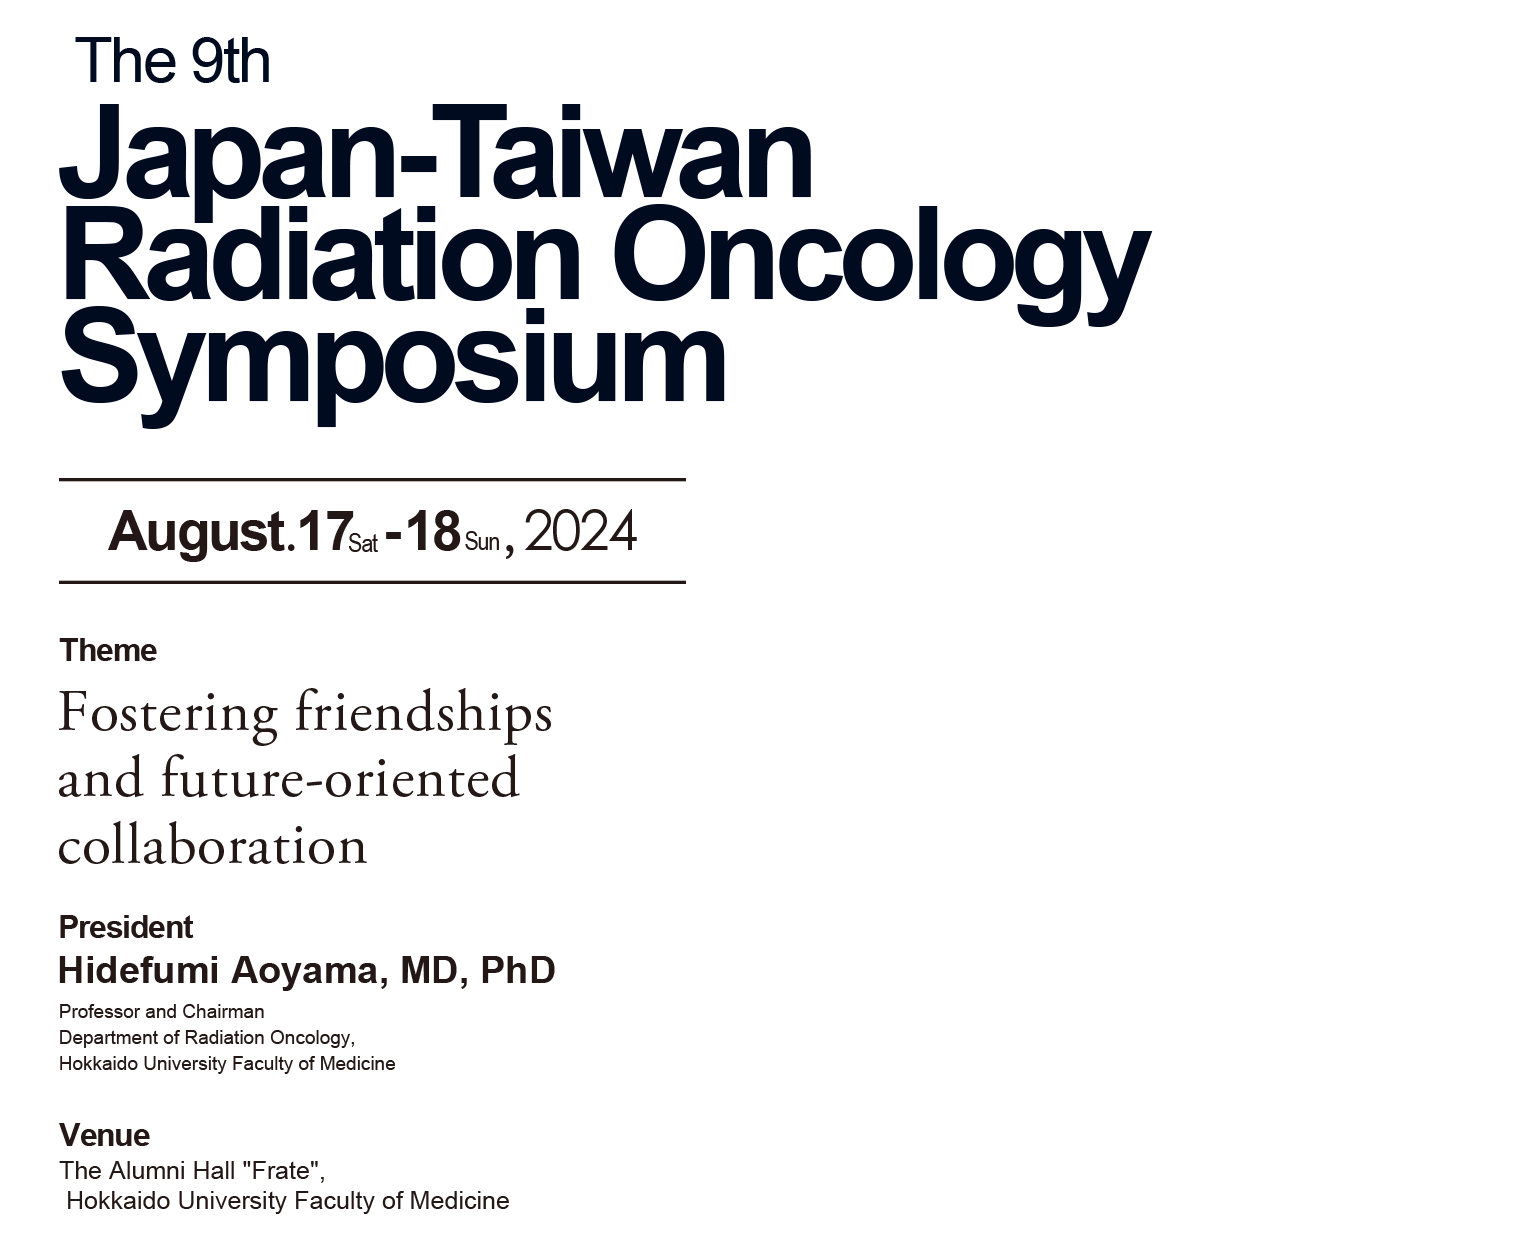 he 9th Taiwan-Japan Radiation Oncology Symposium